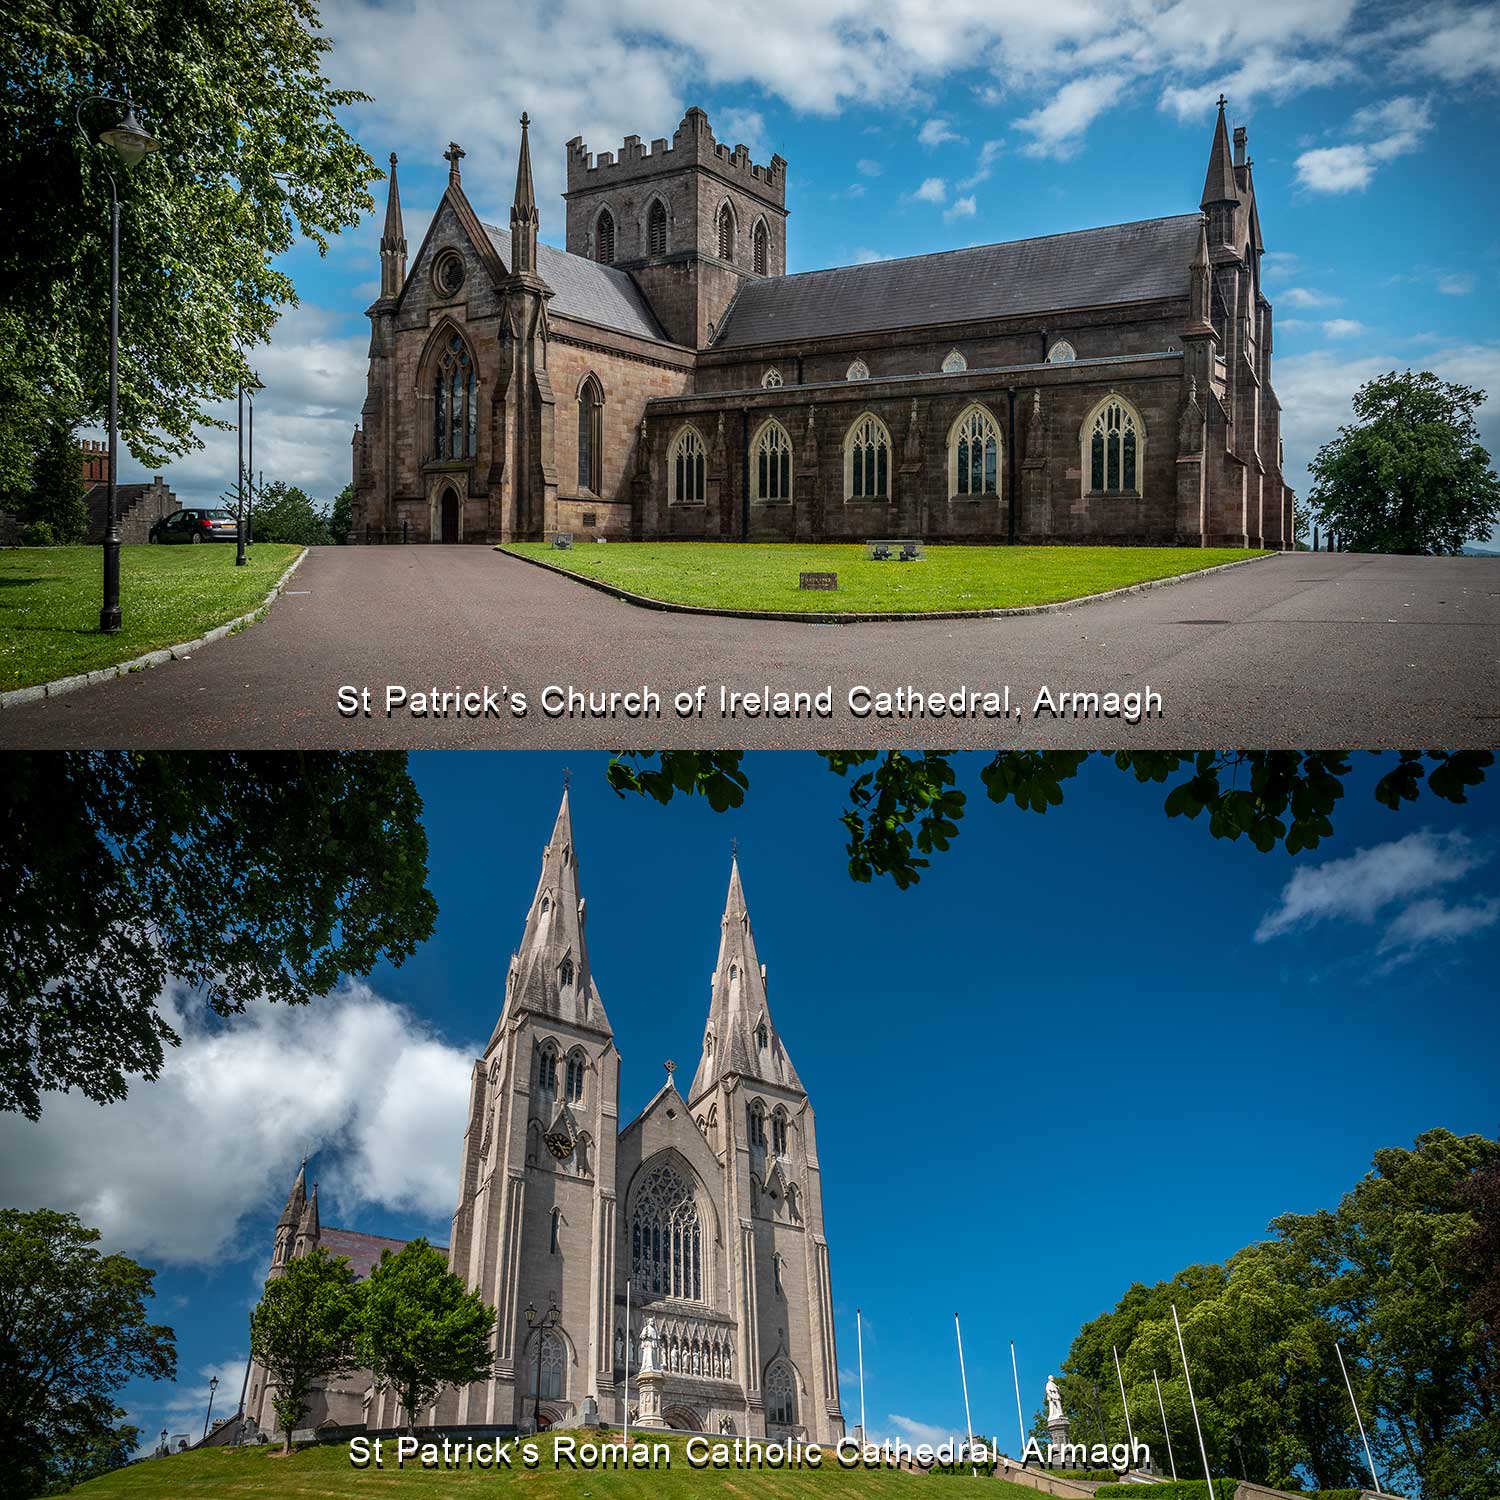 Our two St Patrick's Cathedrals in Armagh